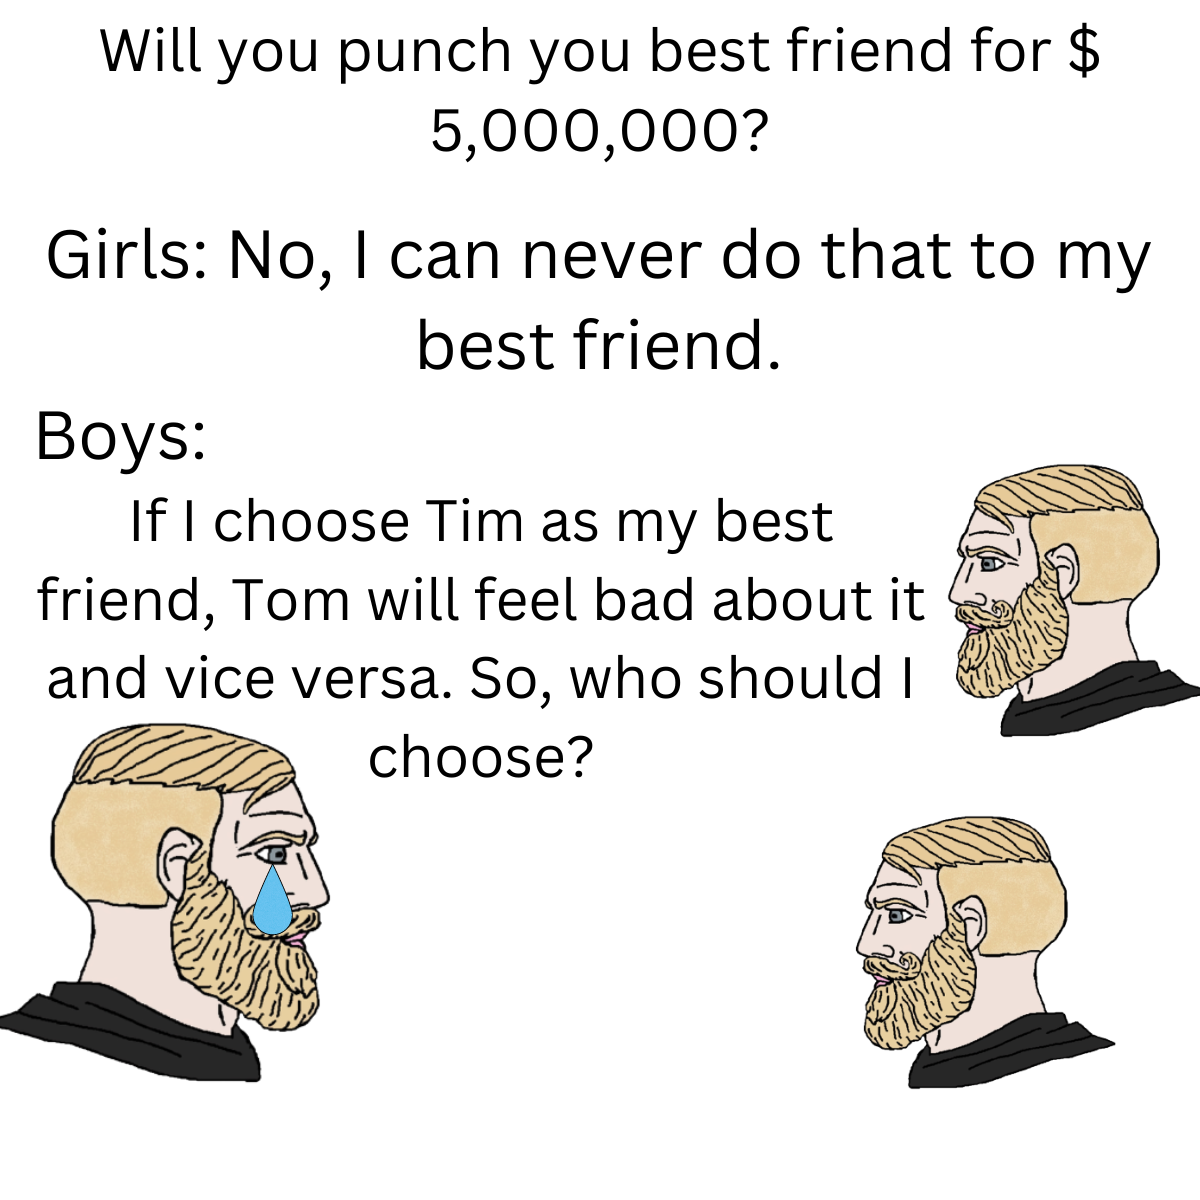 daily dose of pics - cartoon - Will you punch you best friend for $ 5,000,000? Girls No, I can never do that to my best friend. Boys If I choose Tim as my best friend, Tom will feel bad about it and vice versa. So, who should I choose?